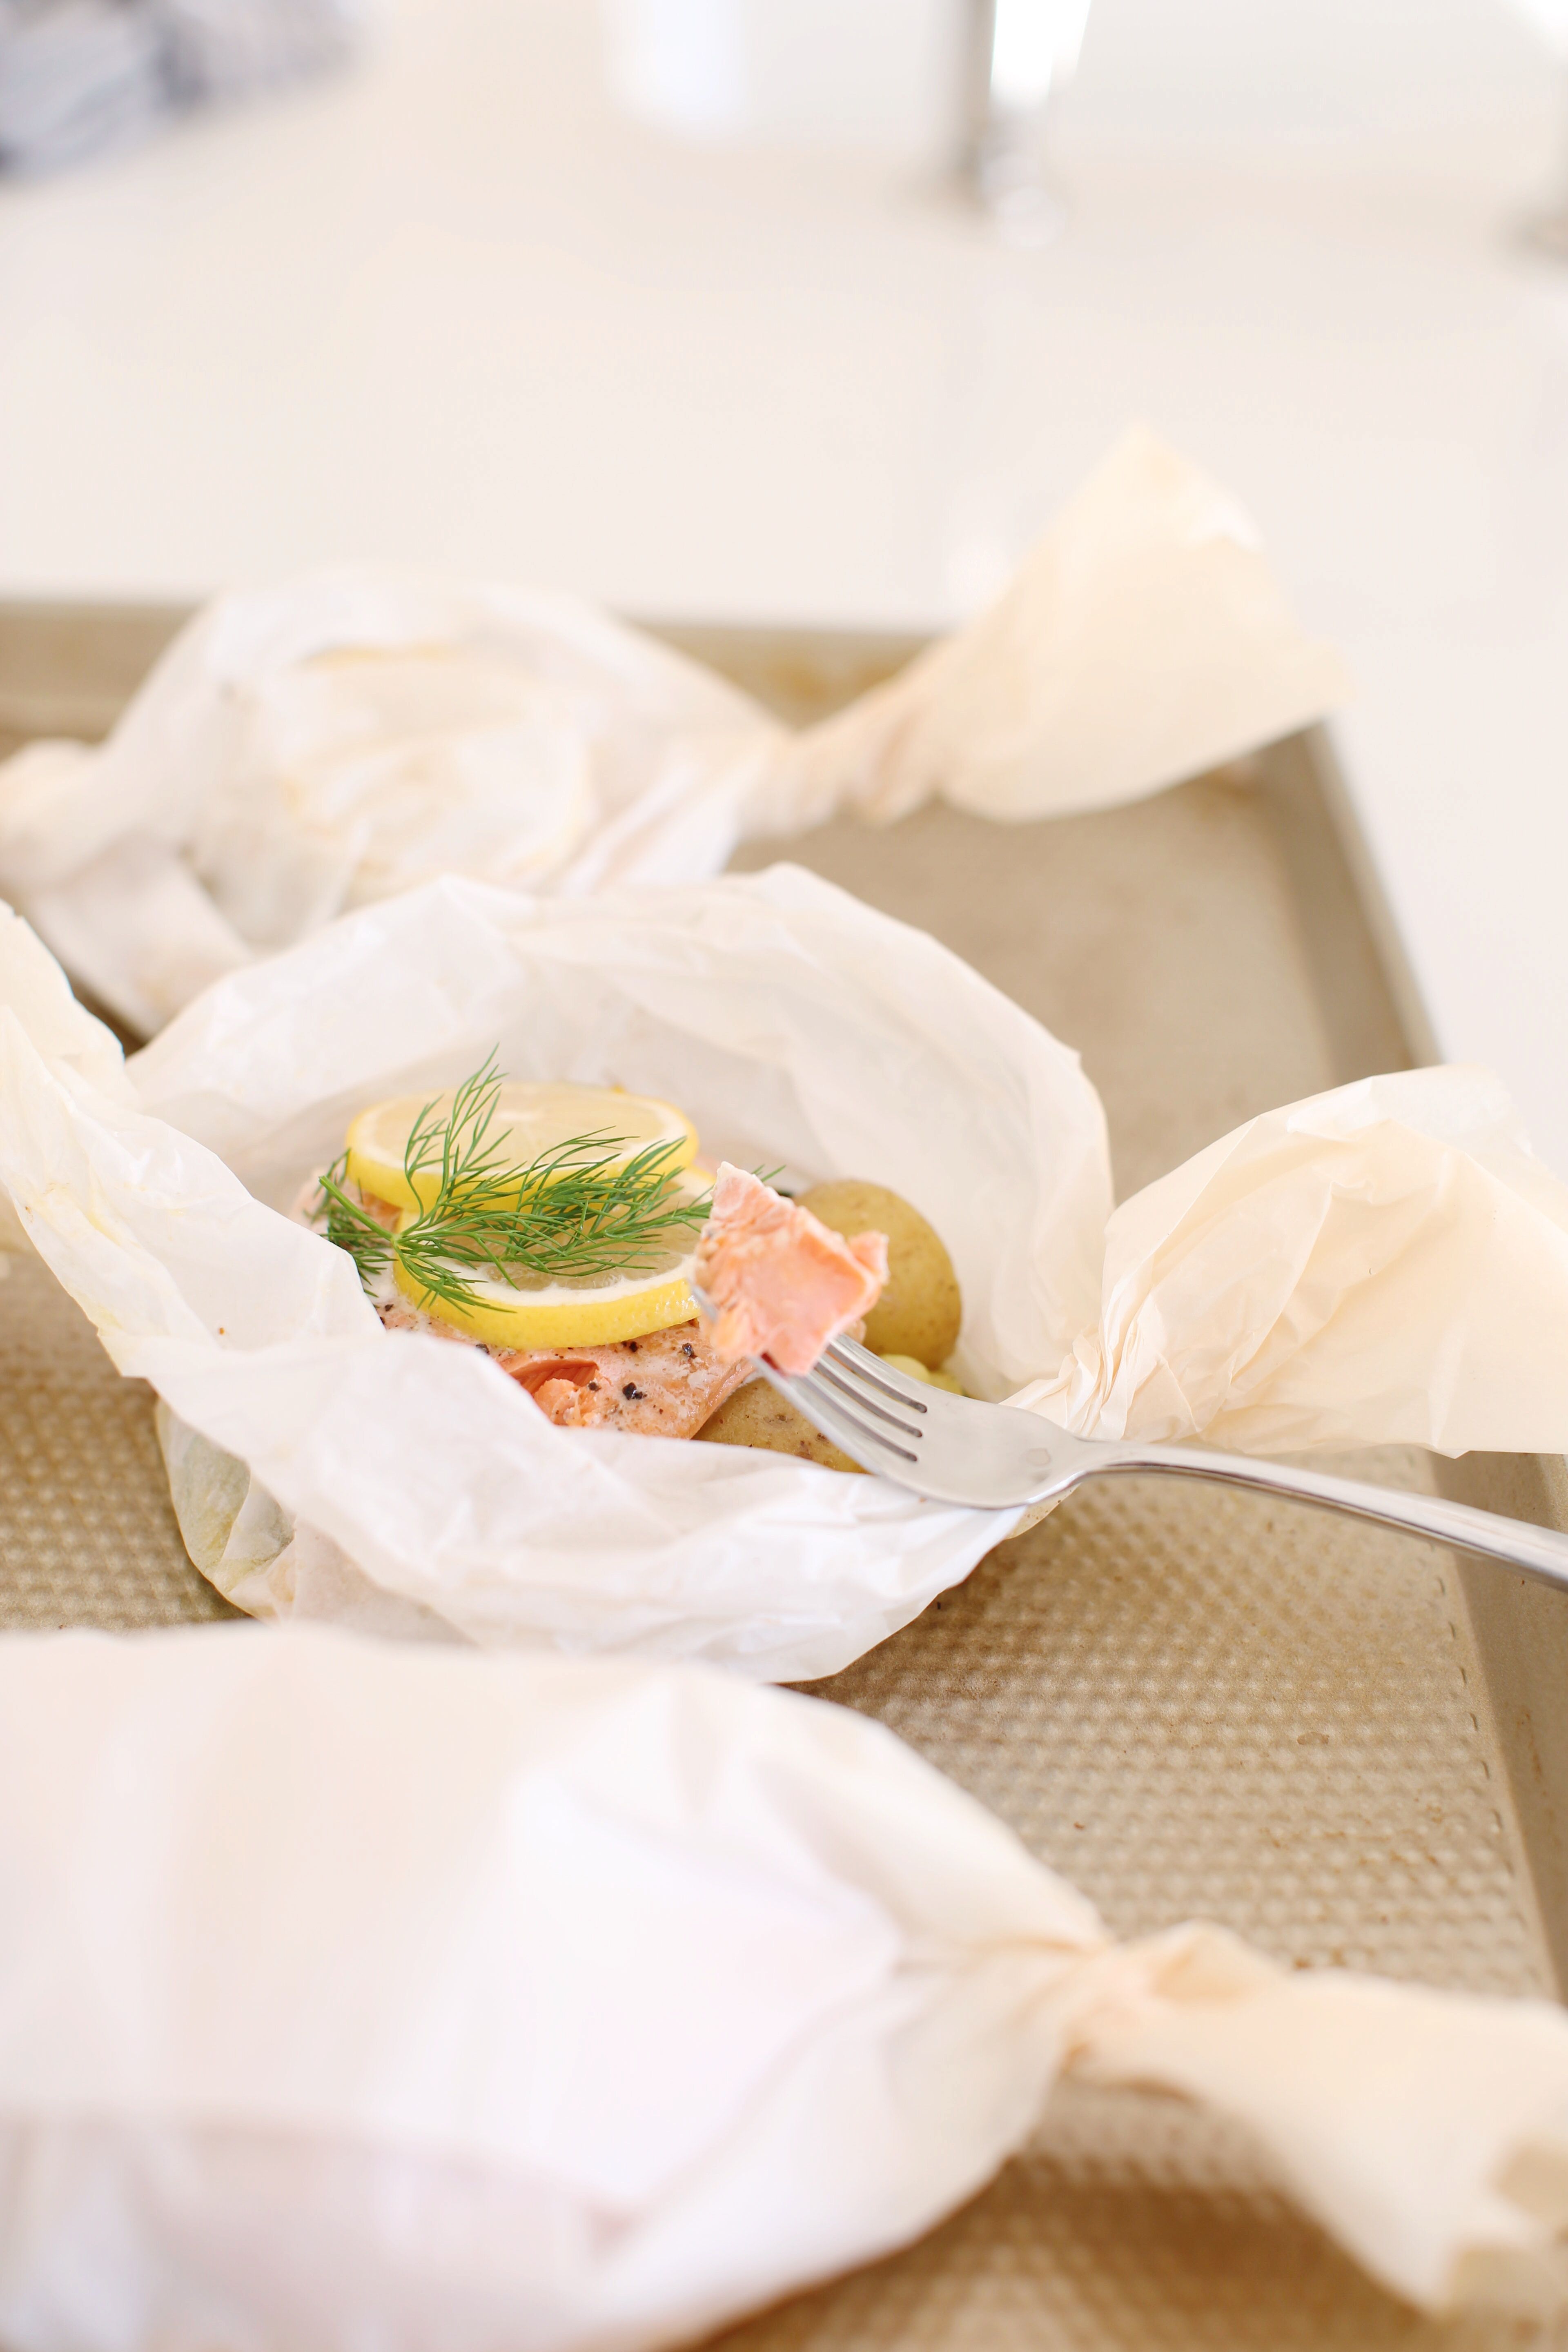 Fish en Papillote for a healthy fresh meal in minutes, all you need is parchment paper and a few simple ingredients!